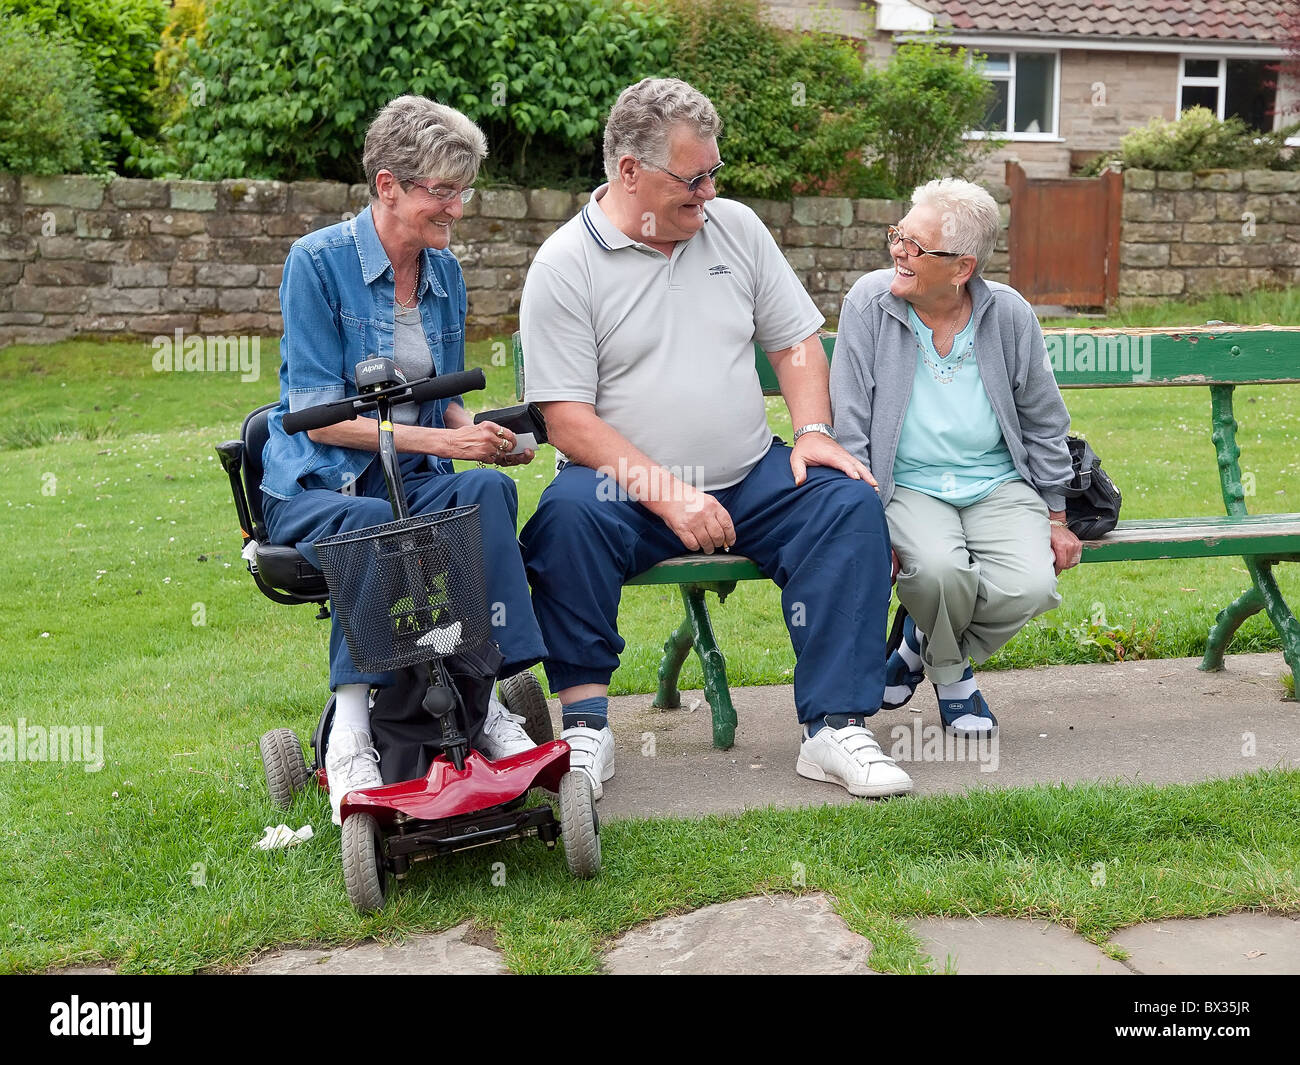 Friends in their 60's seated passing the time of day l to r:- Mrs Joan Morgan, Mr James Marshall and Mrs Doris Hall Stock Photo